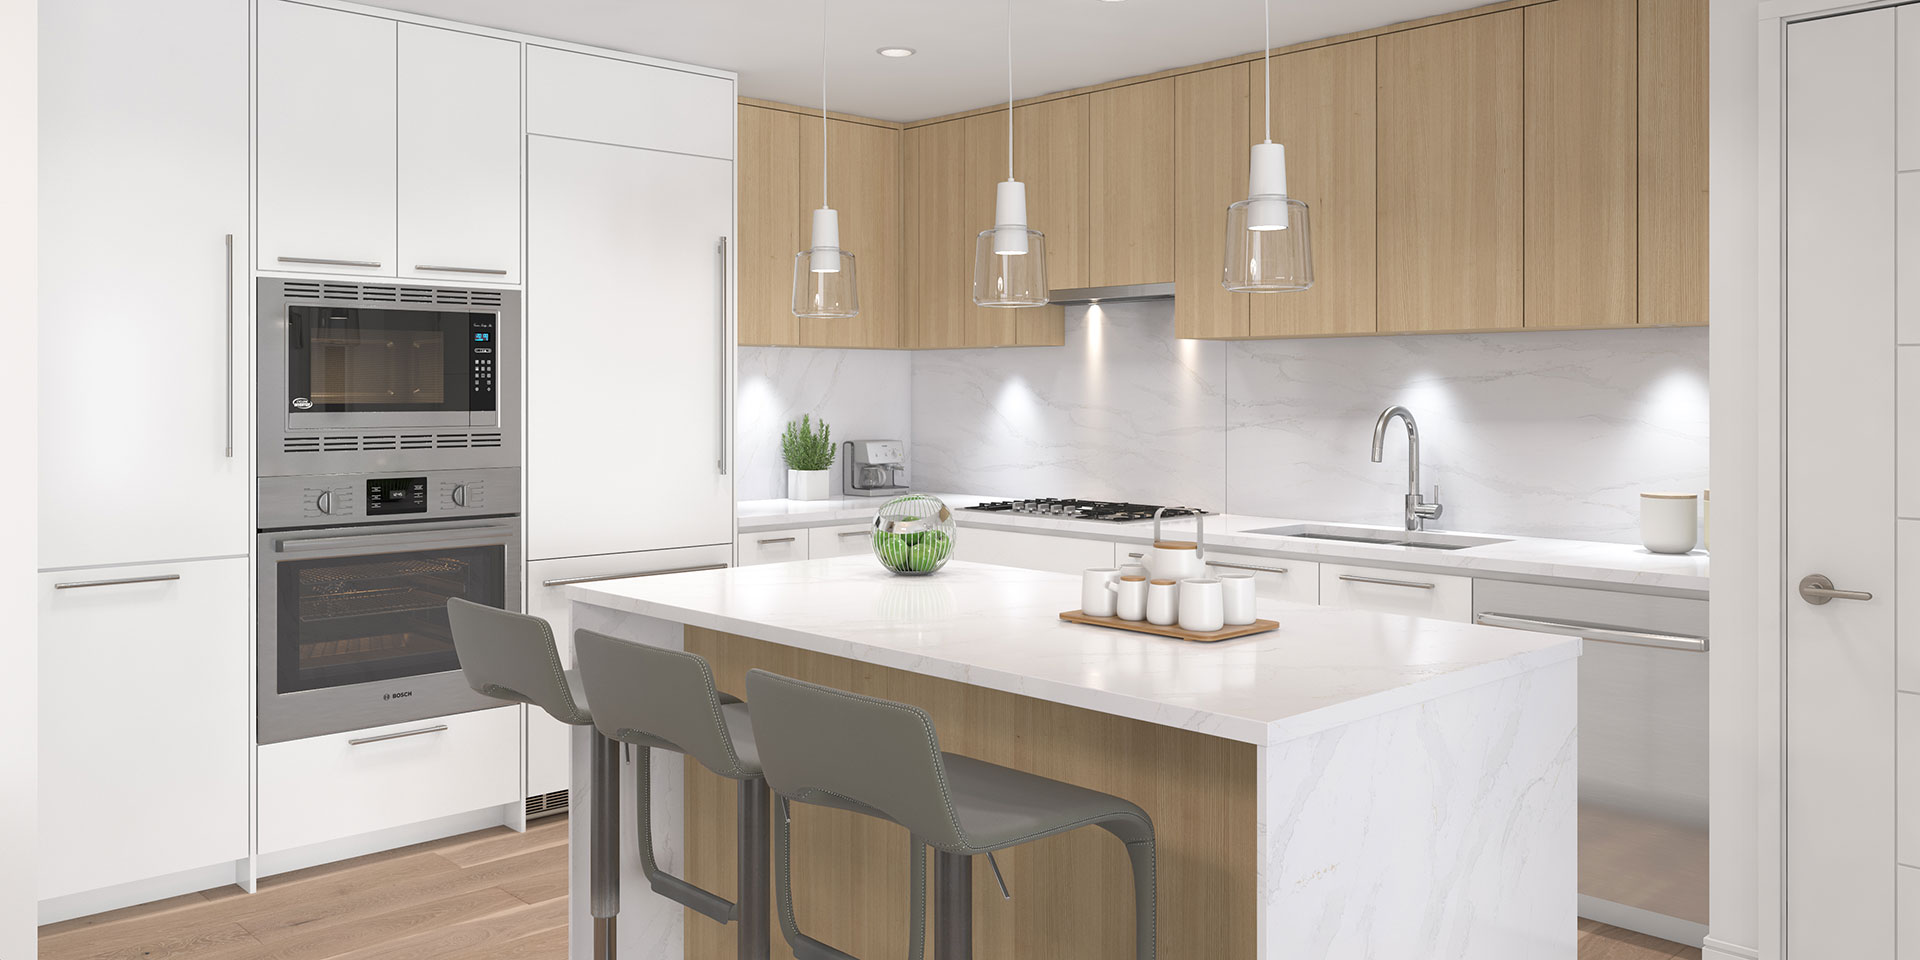 3D Render from Ebb & Flow at Lions Gate Village Project